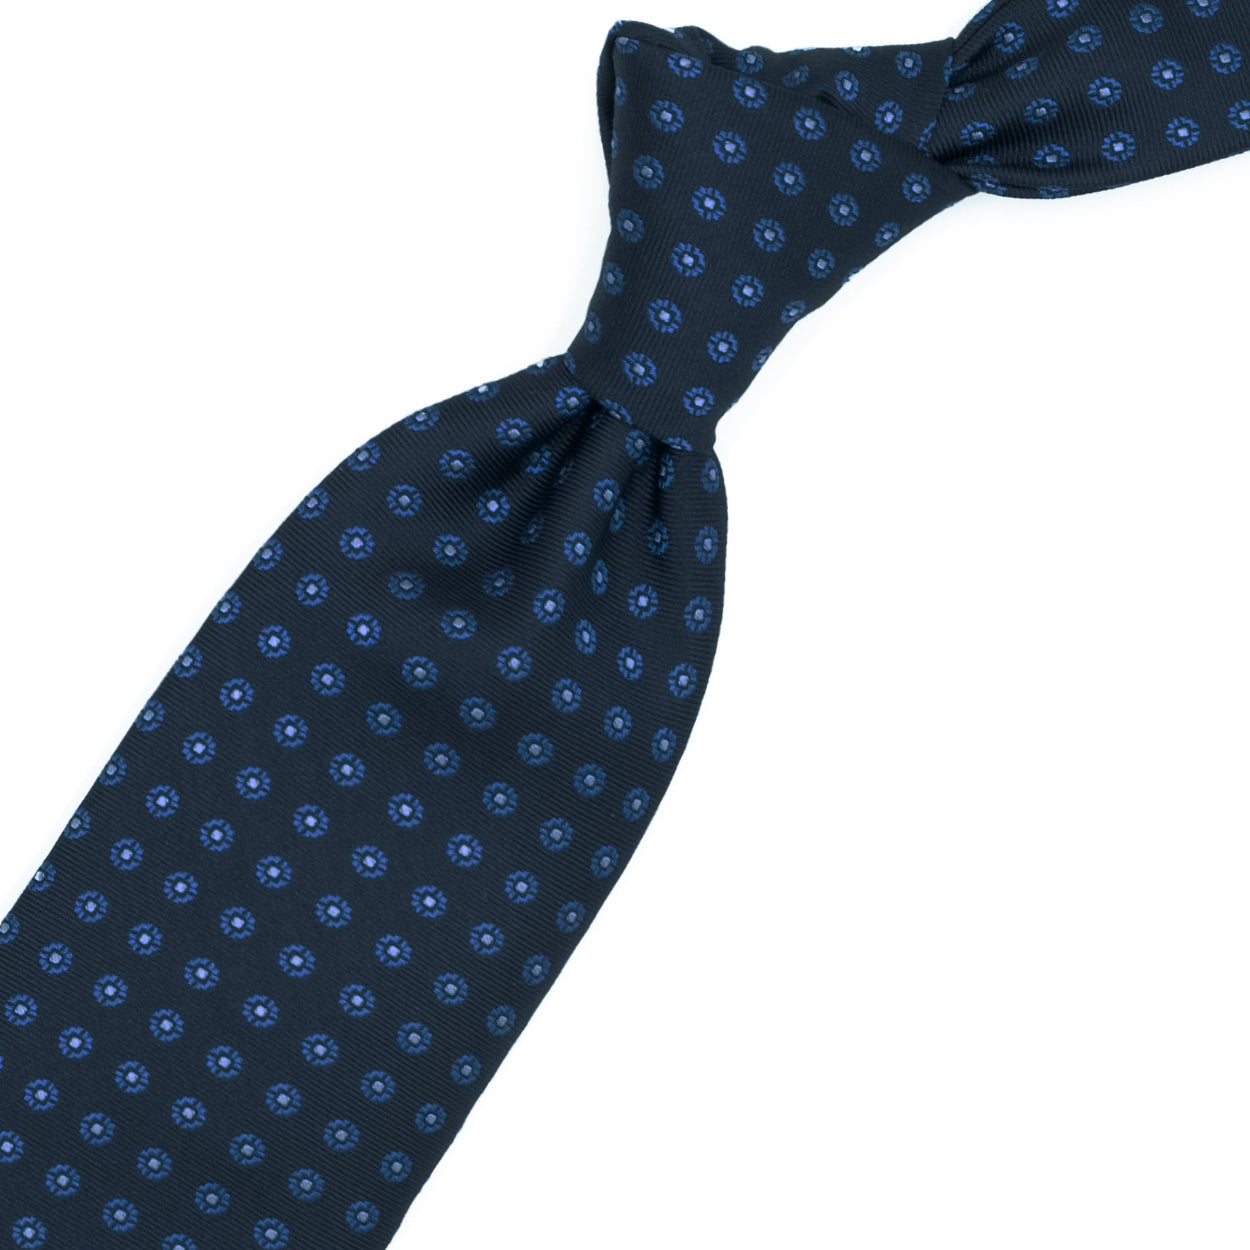 Blue tie with little blue flowers and blue squares